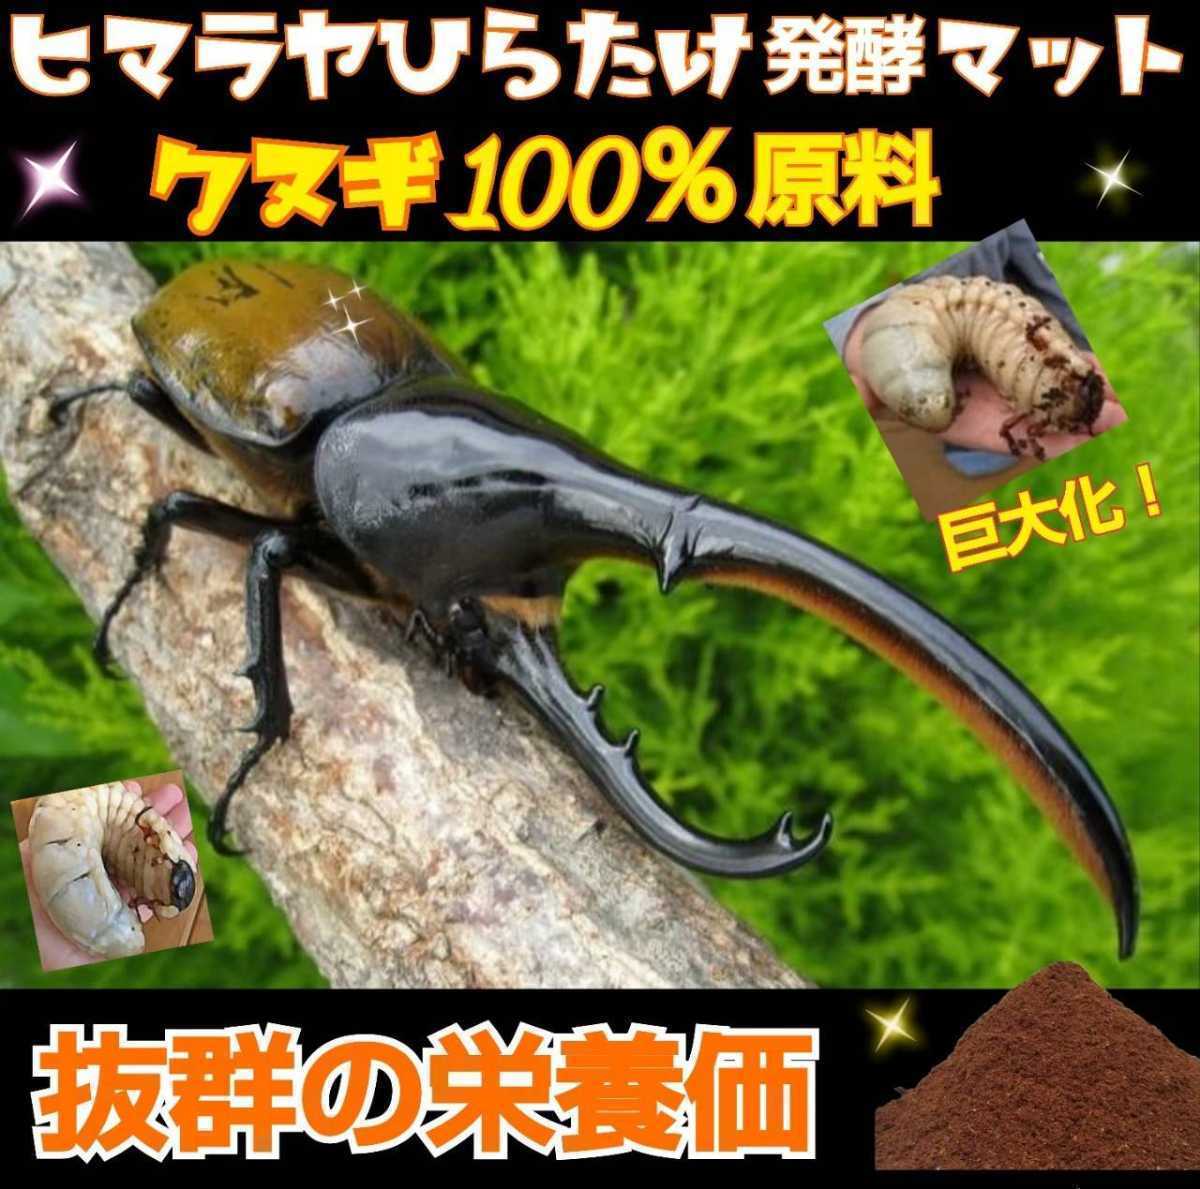 . insect ... no easy to use [ improvement version ]himalaya common ... floor departure . rhinoceros beetle mat * larva. bait * production egg . eminent! nutrition addition agent entering! zipper attaching sack 